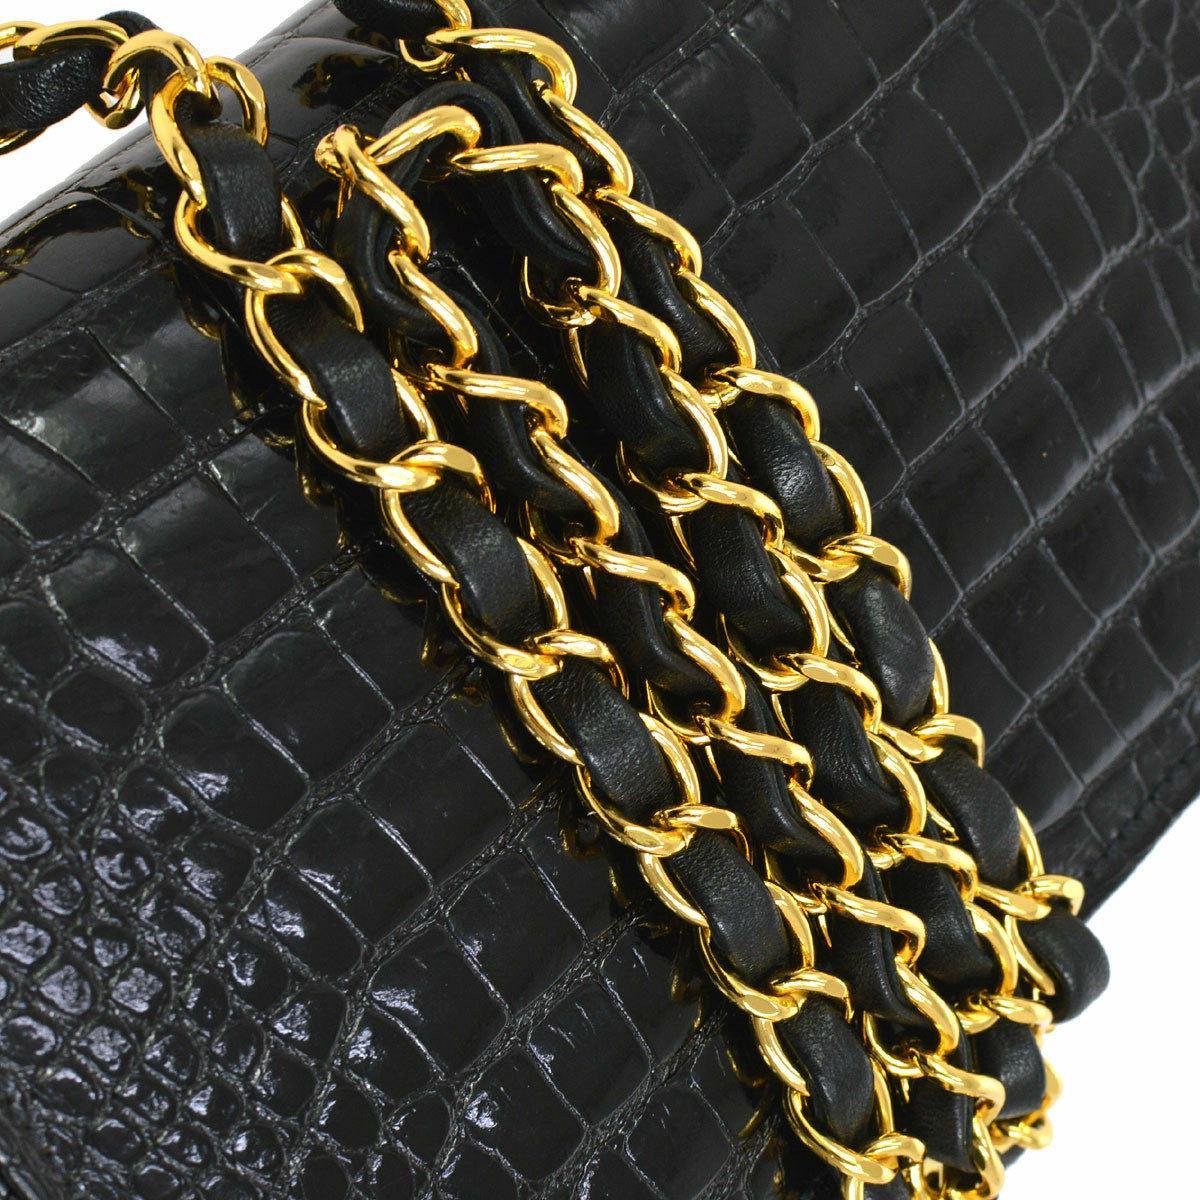 Crocodile
Leather
Leather lining
Gold tone hardware 
Made in France
Shoulder strap drop 17